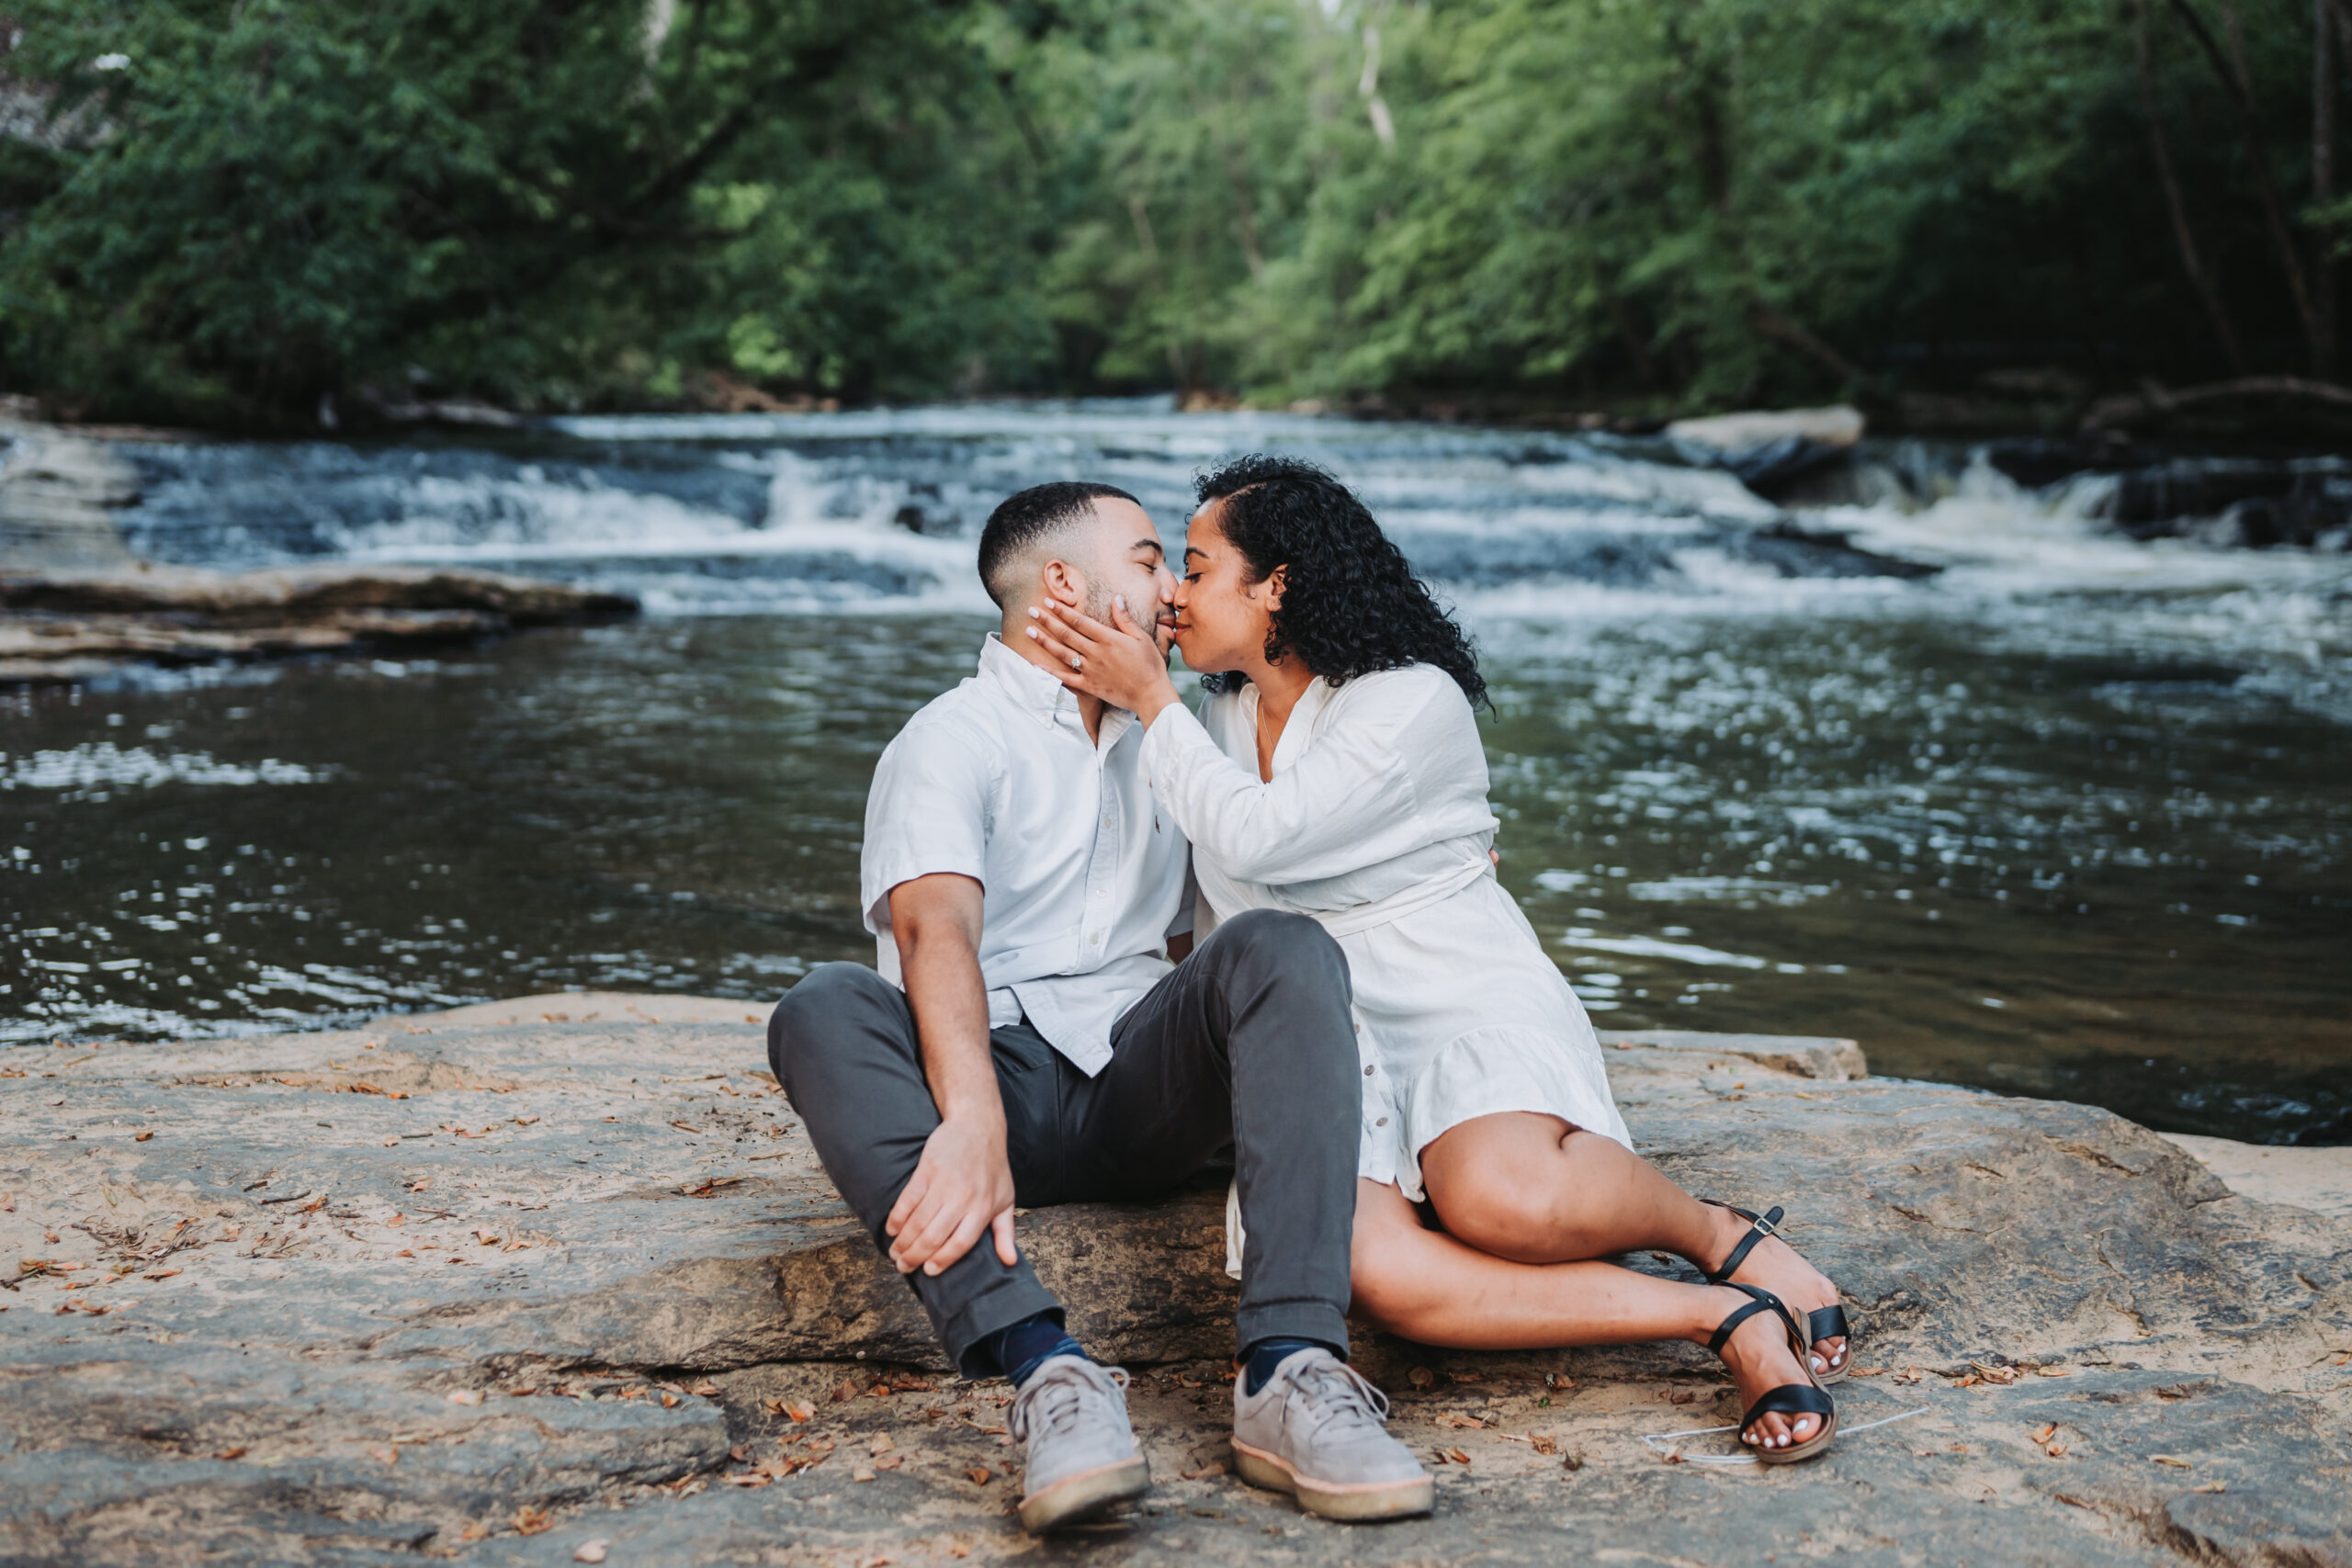 Engagement photos at Roswell Mill. Couple sitting on rock with waterfall in background.